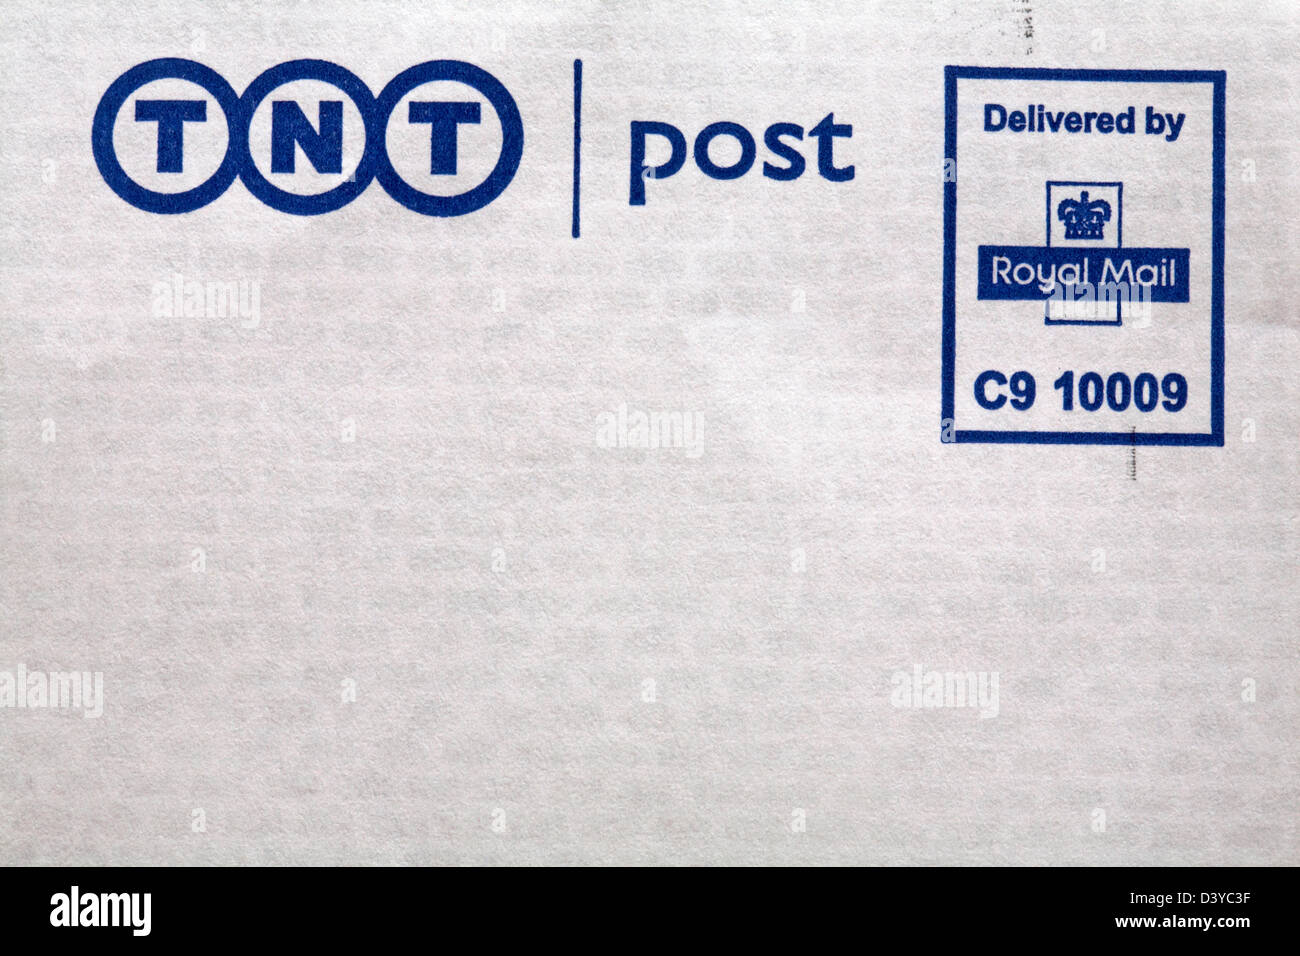 TNT Post delivered by Royal Mail information on envelope Stock Photo